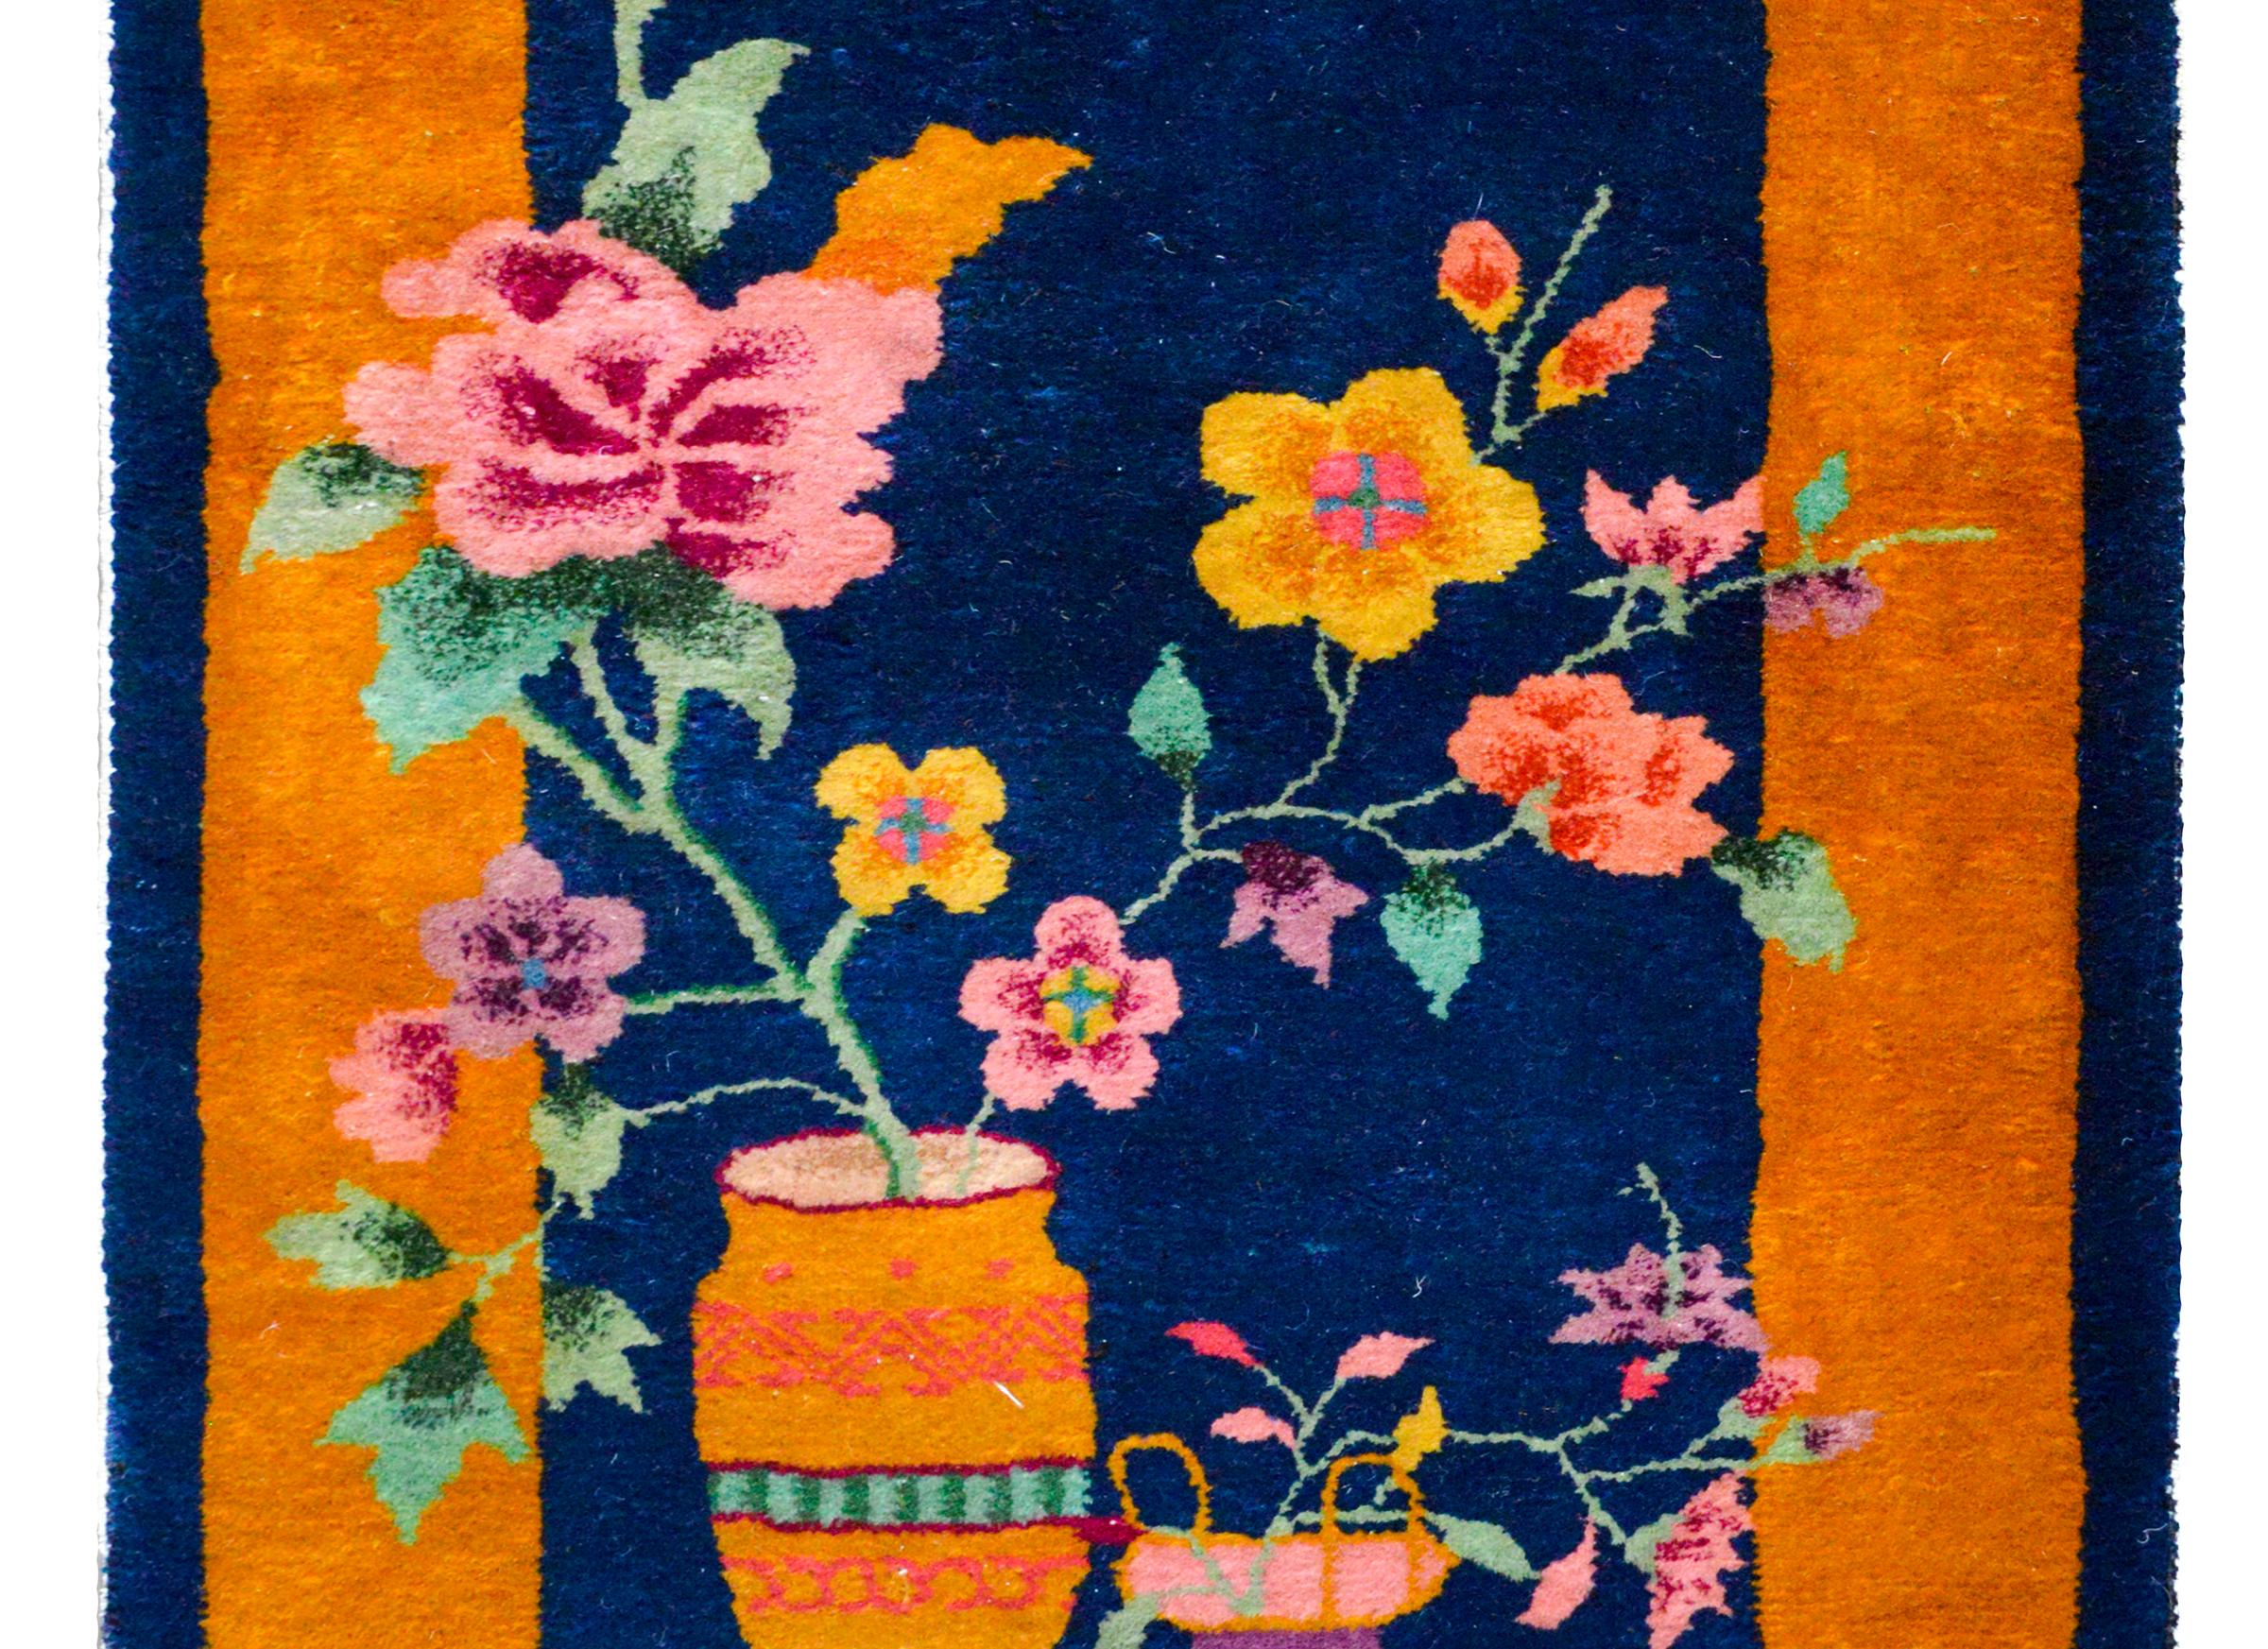 A Wonderfull early 20th century Chinese Art Deco rug with multi-colored peony and chrysanthemum plants each potted in a vase, and set against a dark indigo background and surrounded but a wide gold border.